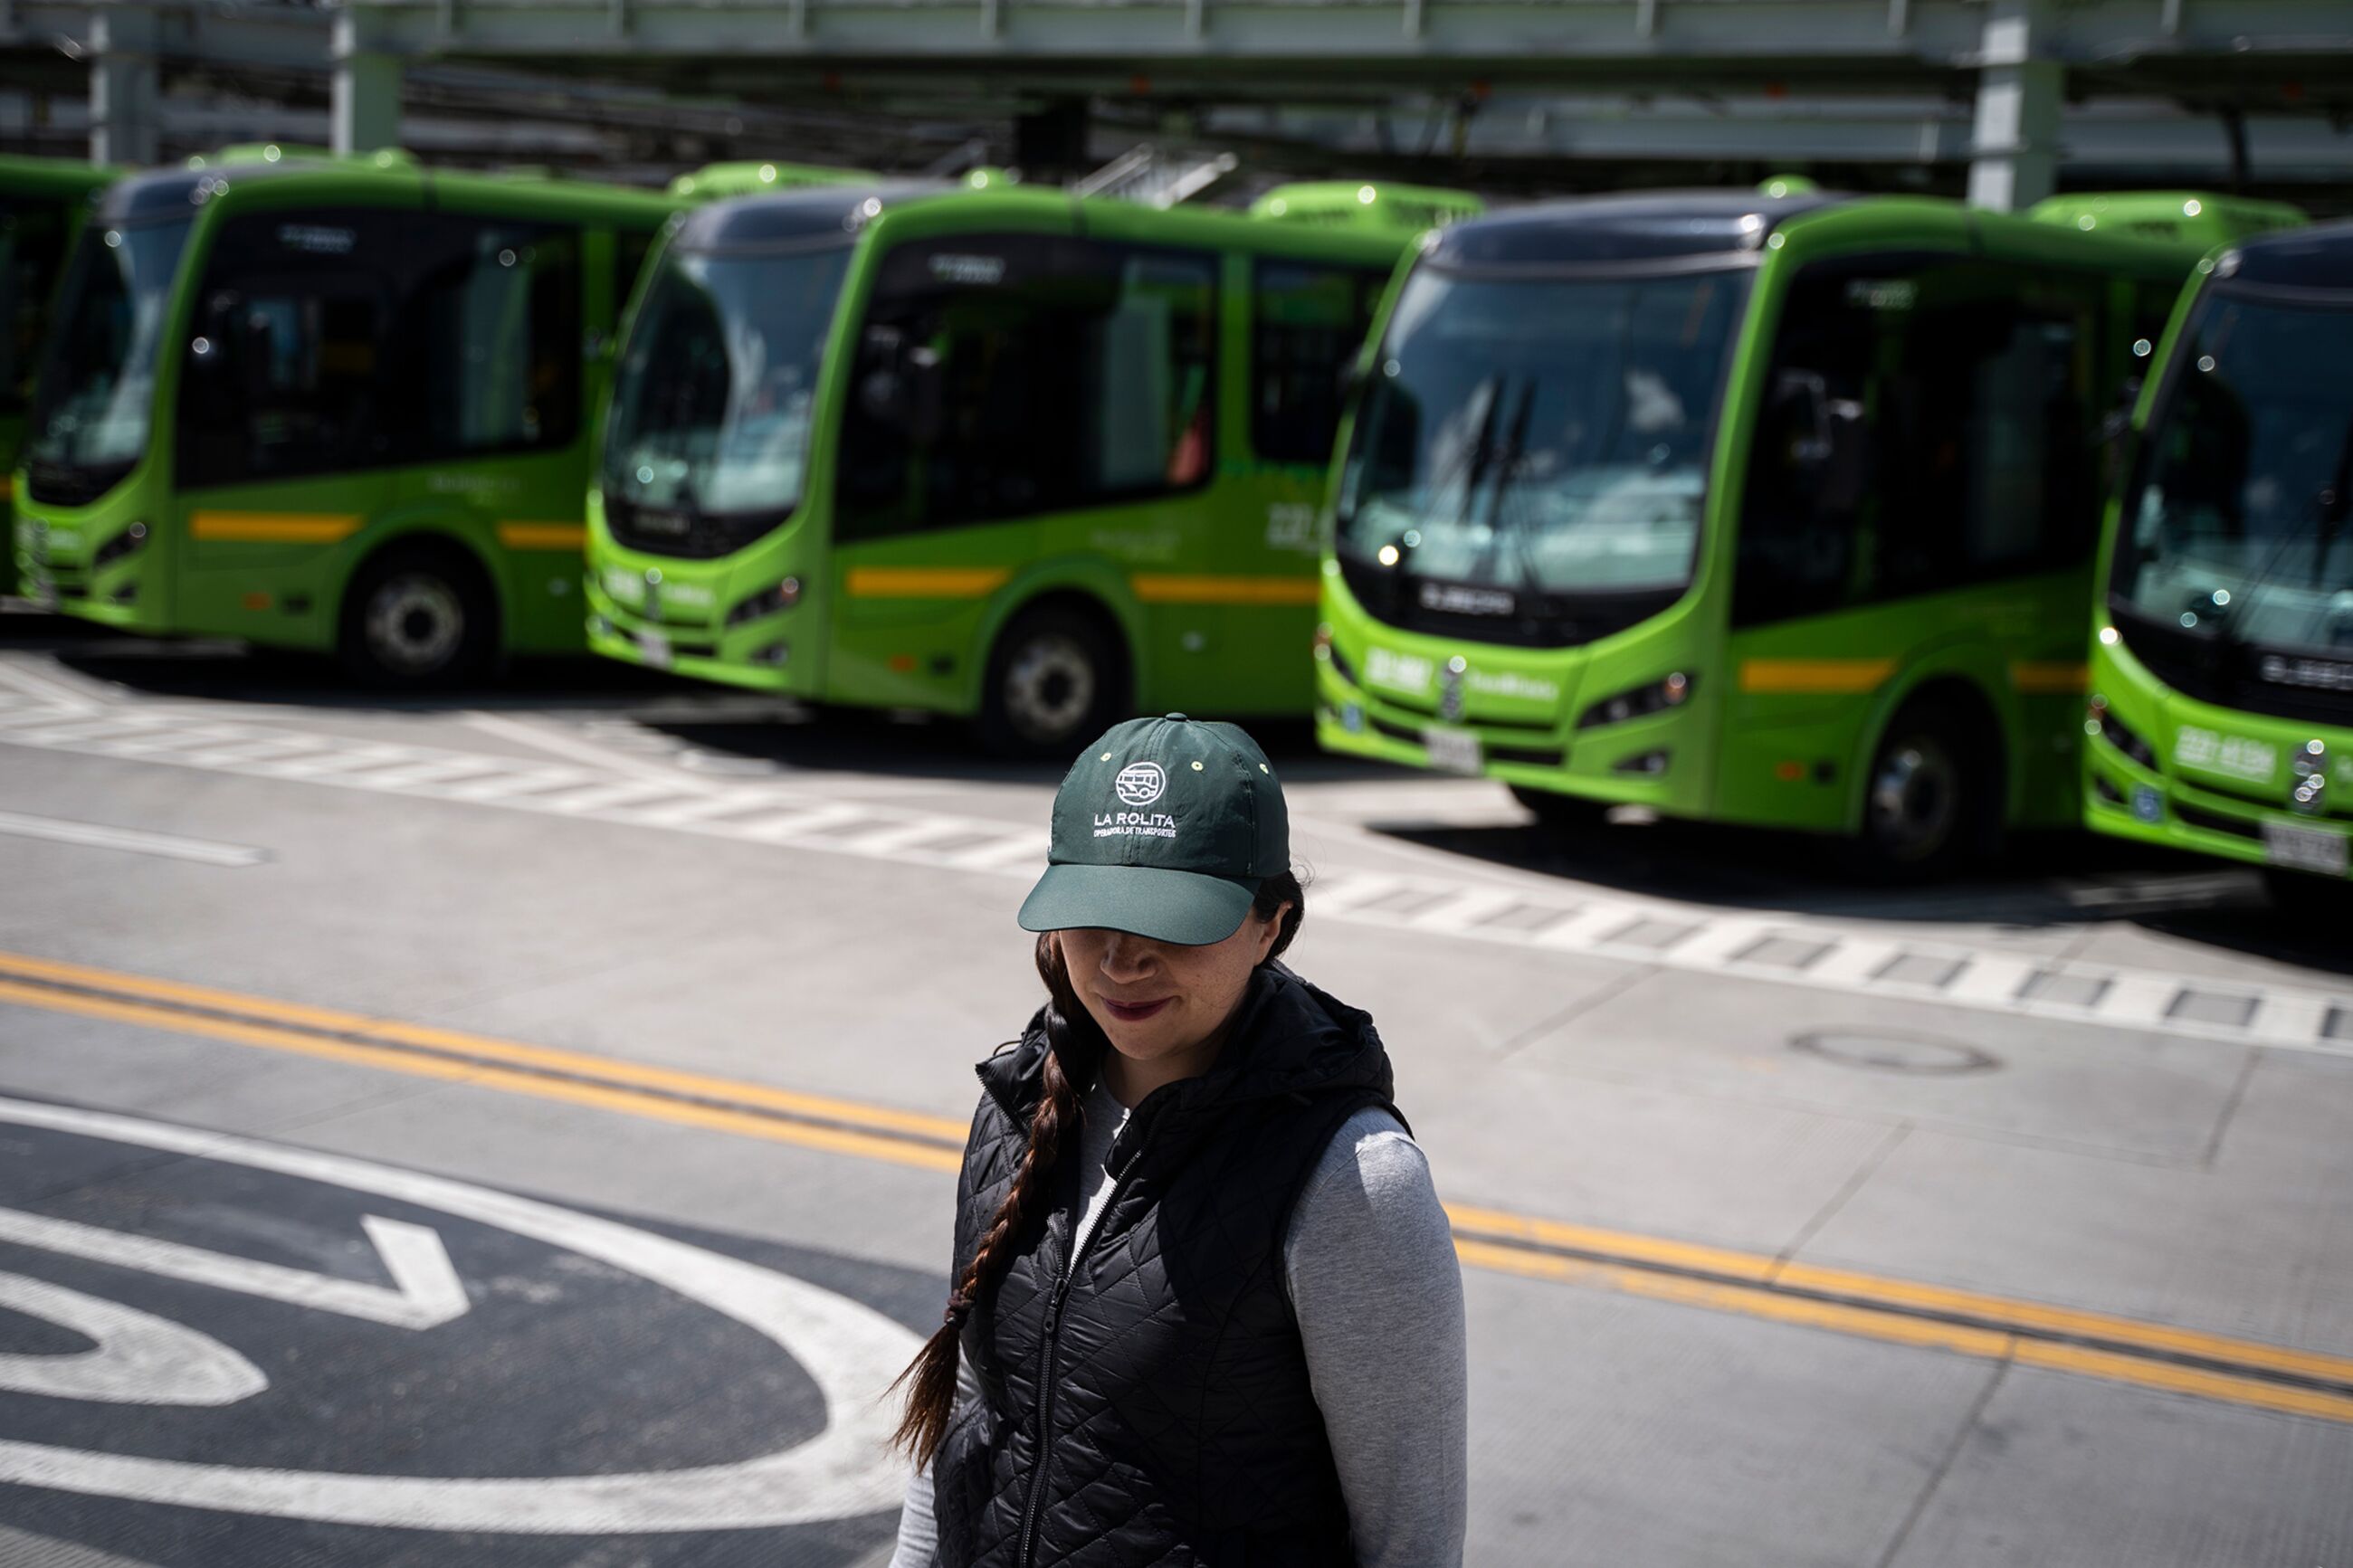 Bogotá last year launched a public transit entity made up entirely of electric buses, with about half the drivers being women, a rarity in the male-dominated field. 